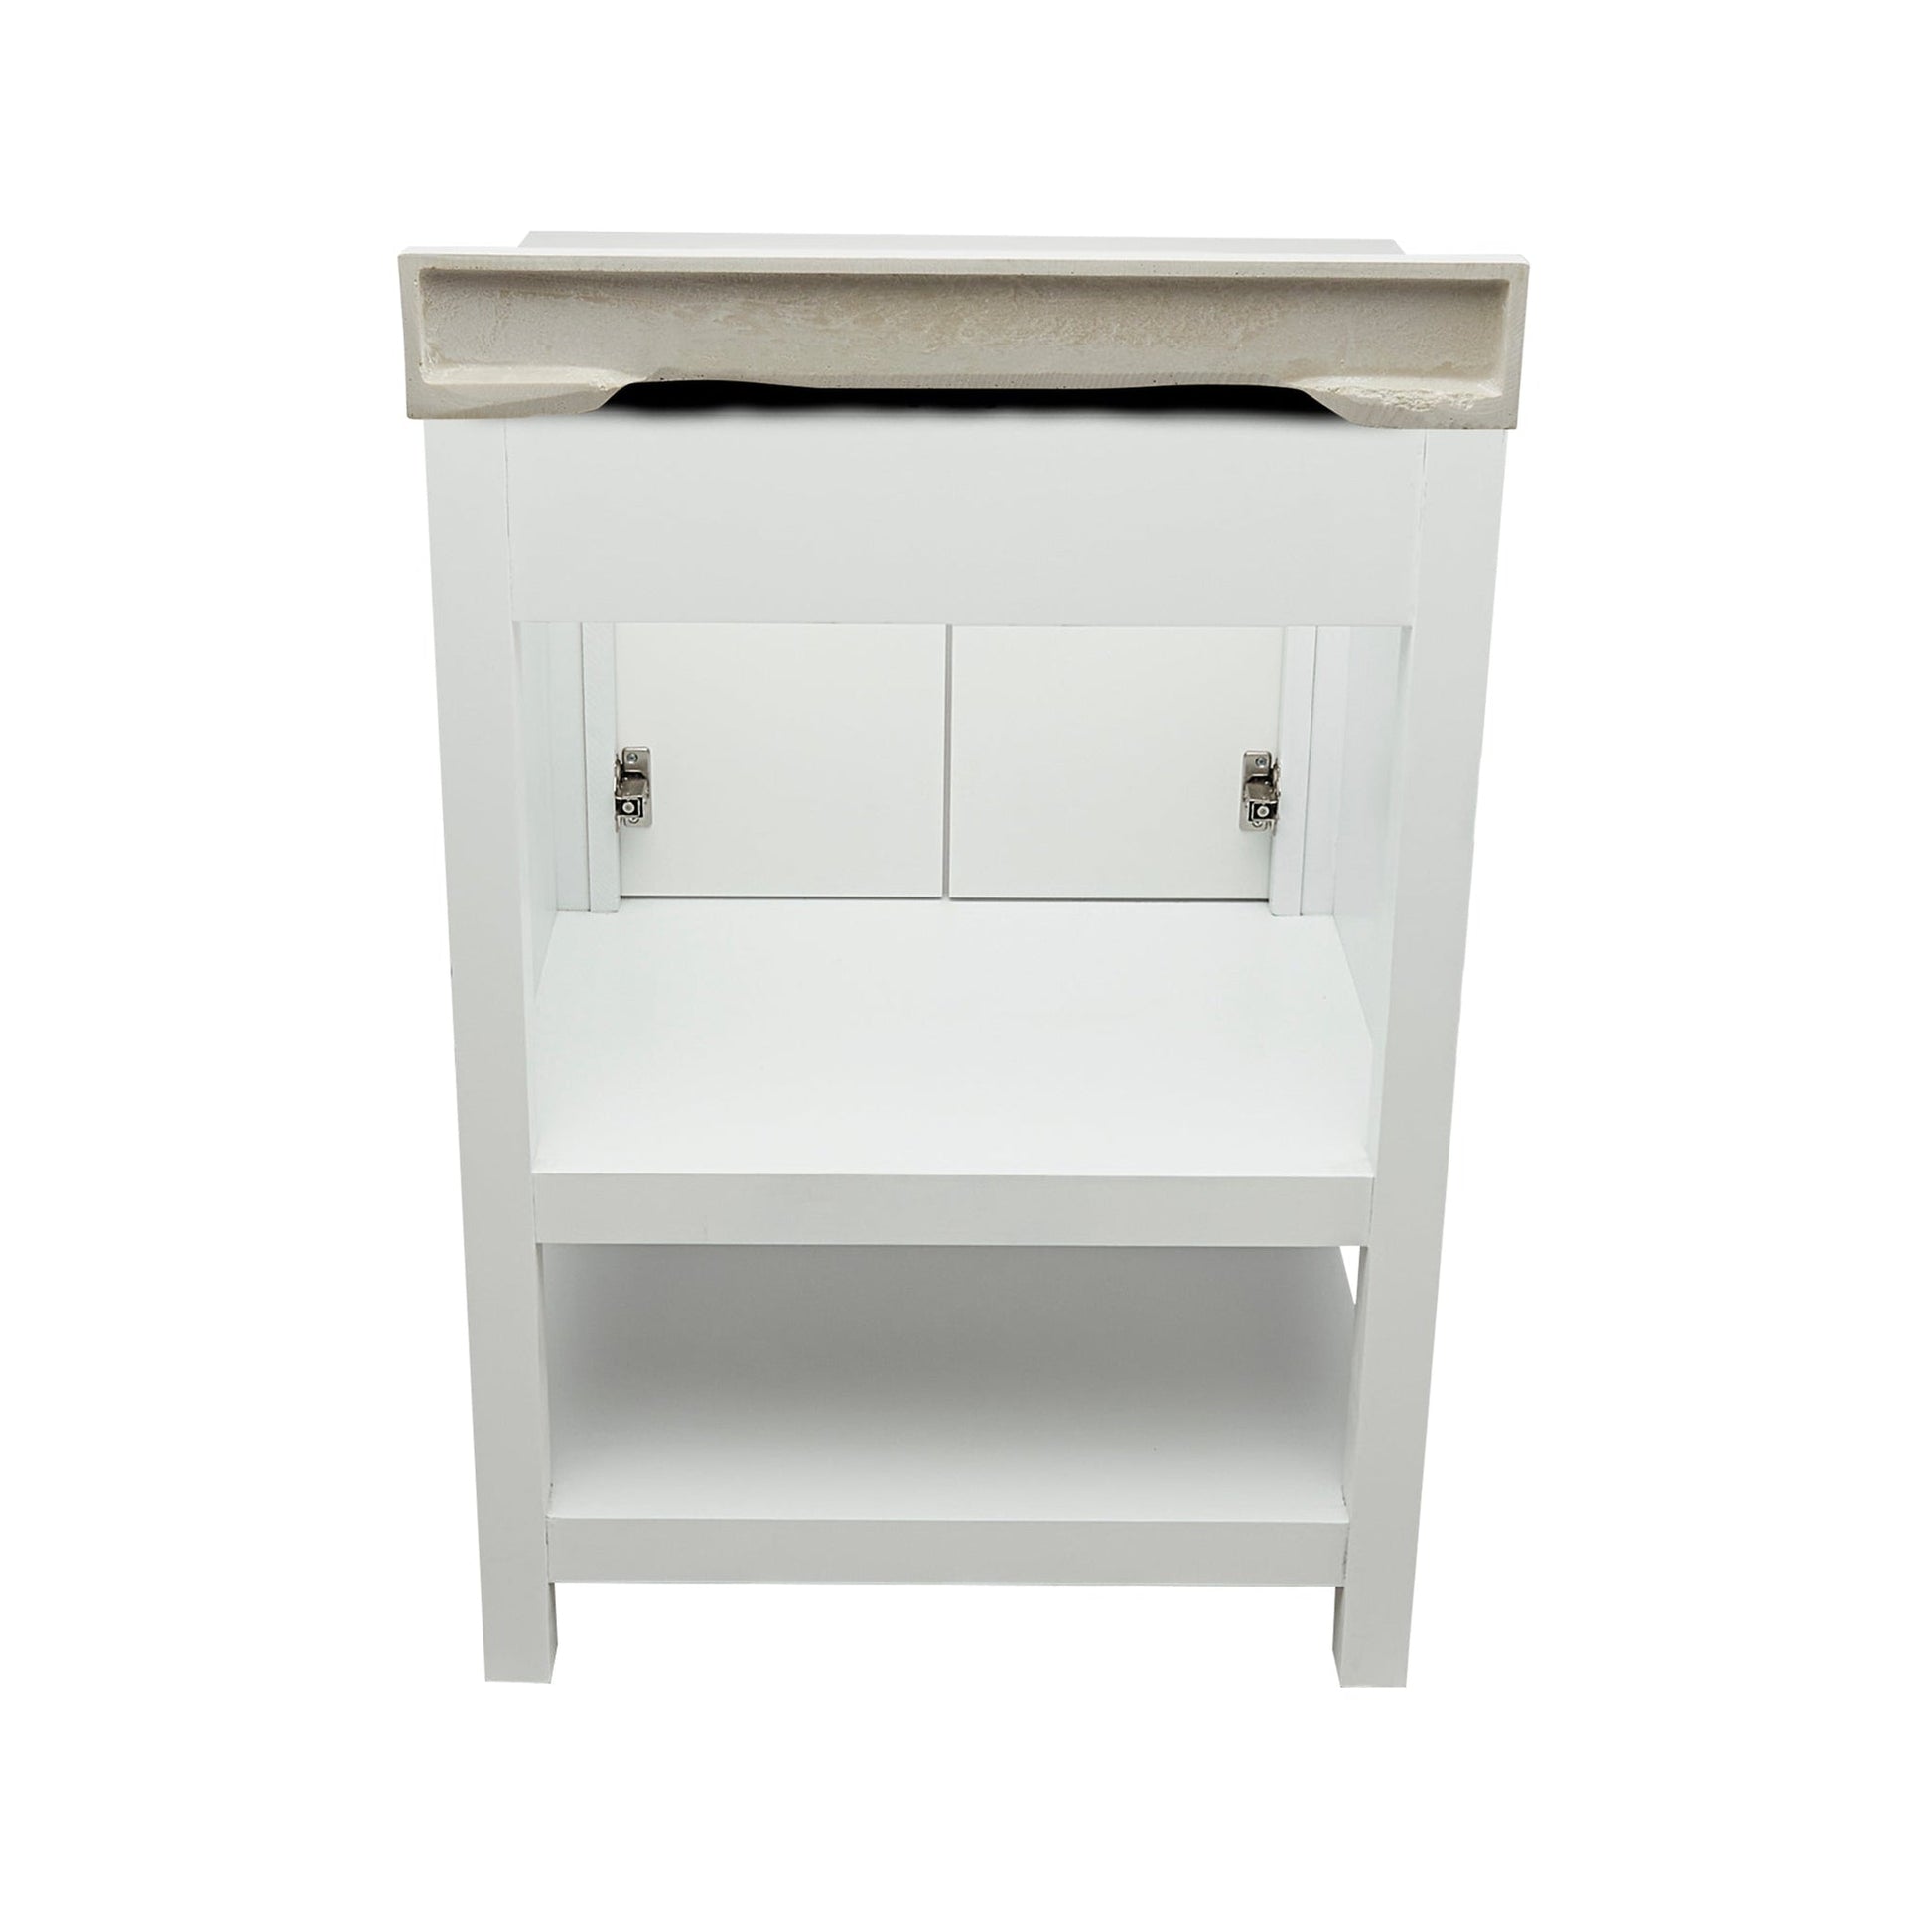 Ella's Bubbles Taos 25" White Bathroom Vanity With White Cultured Marble Top With White Backsplash and Sink